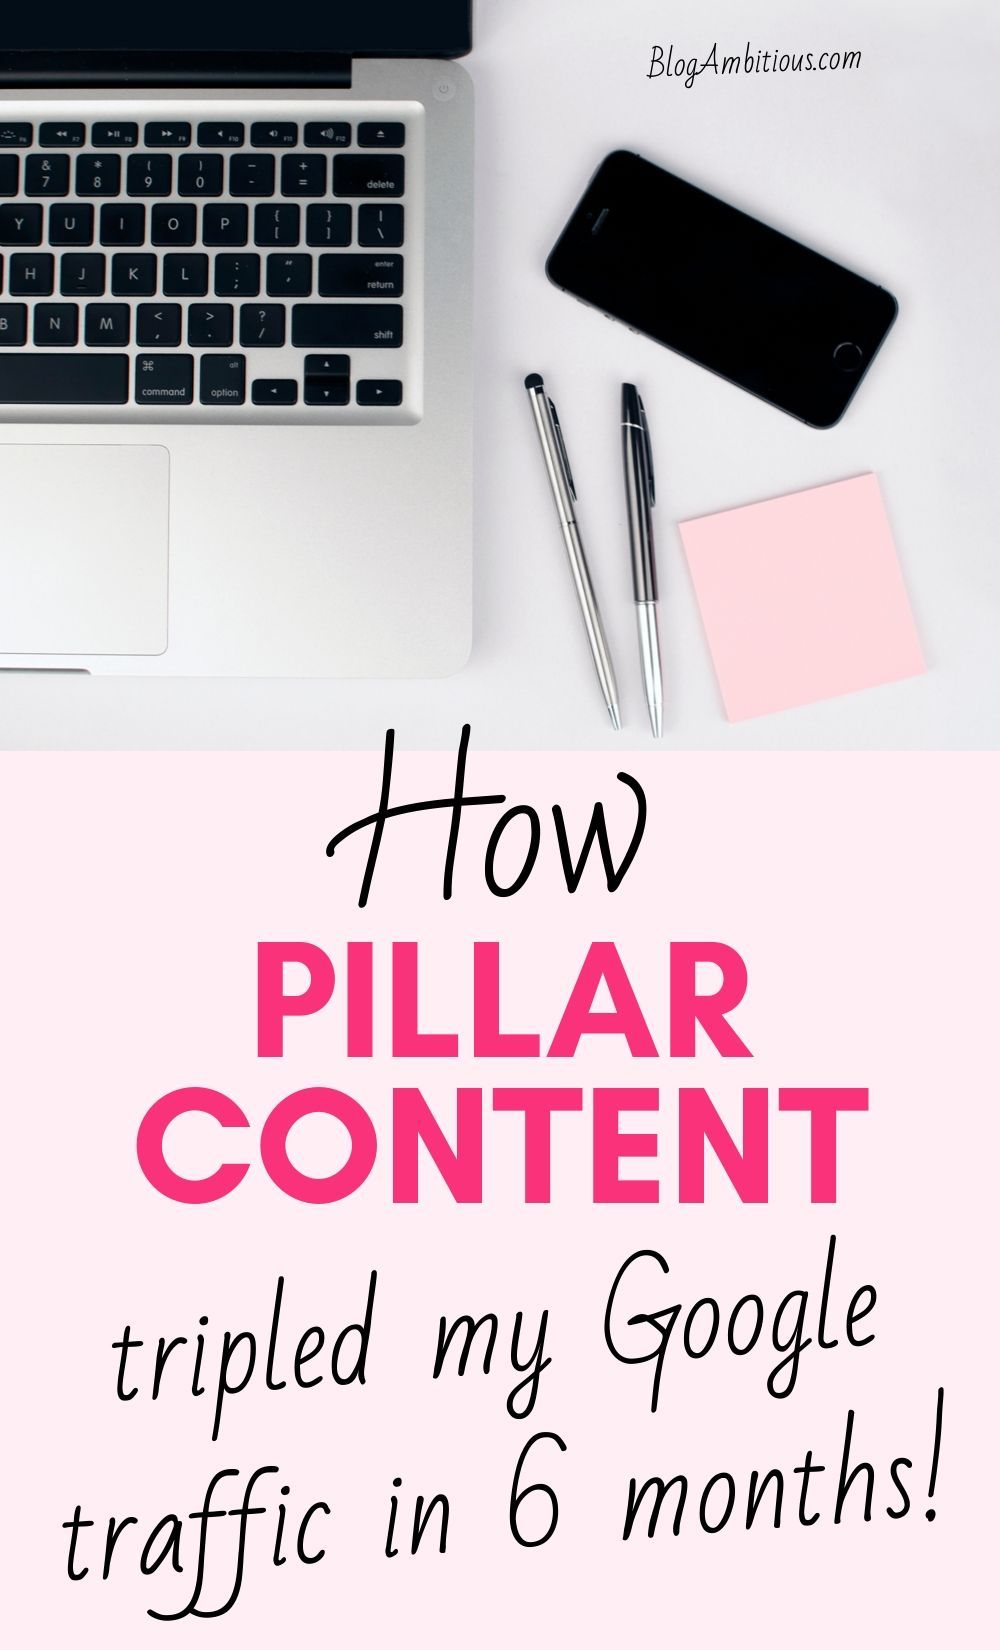 How Pillar Content 3x my Google Traffic in just 6 months!!